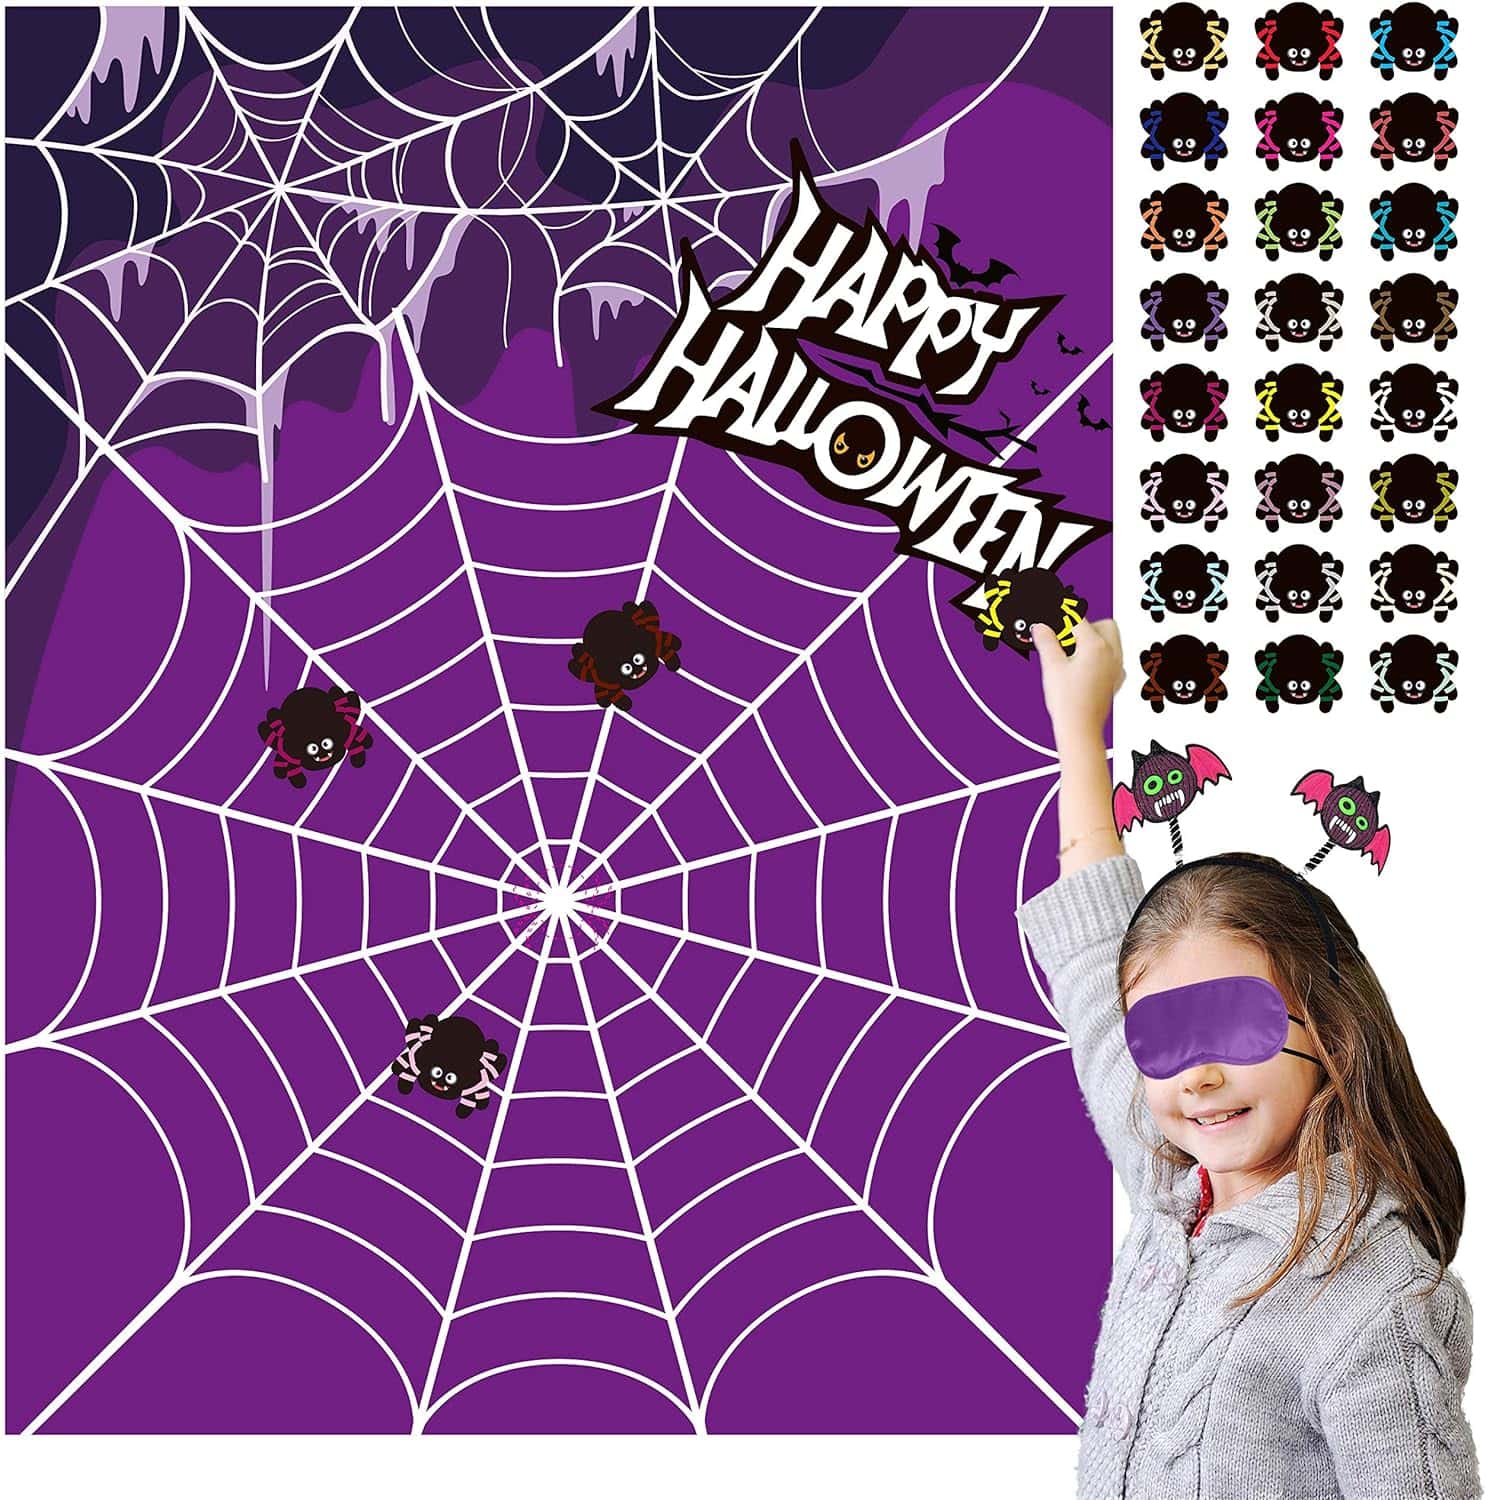 pin the spider on the web kids game for halloween